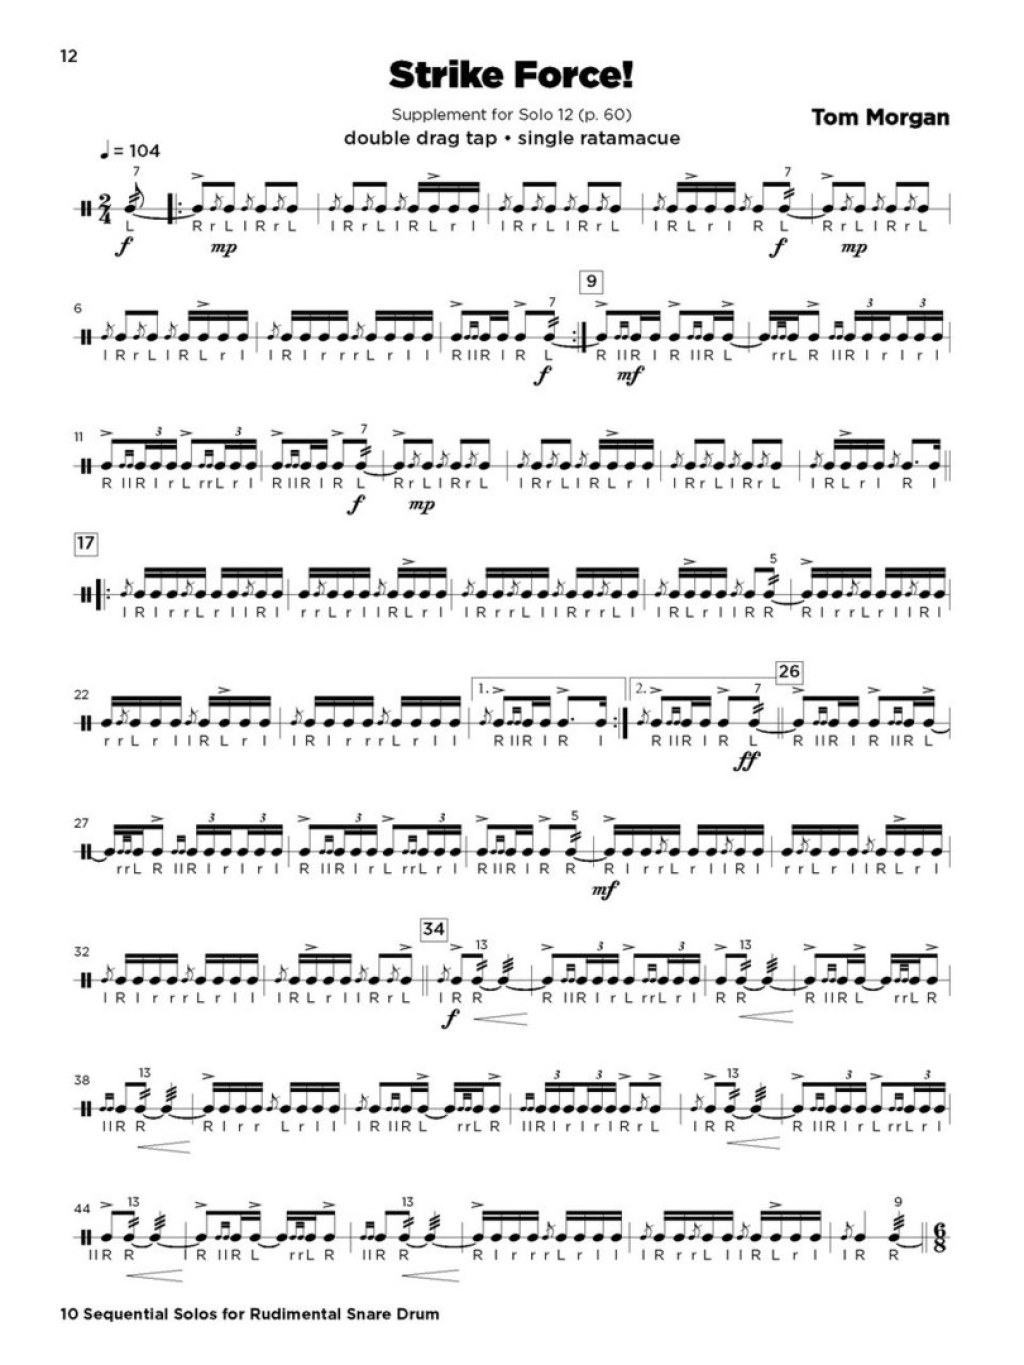 solo snare drum - Morgan, Tom:  Sequential Solos for Rudimental Snare Drum